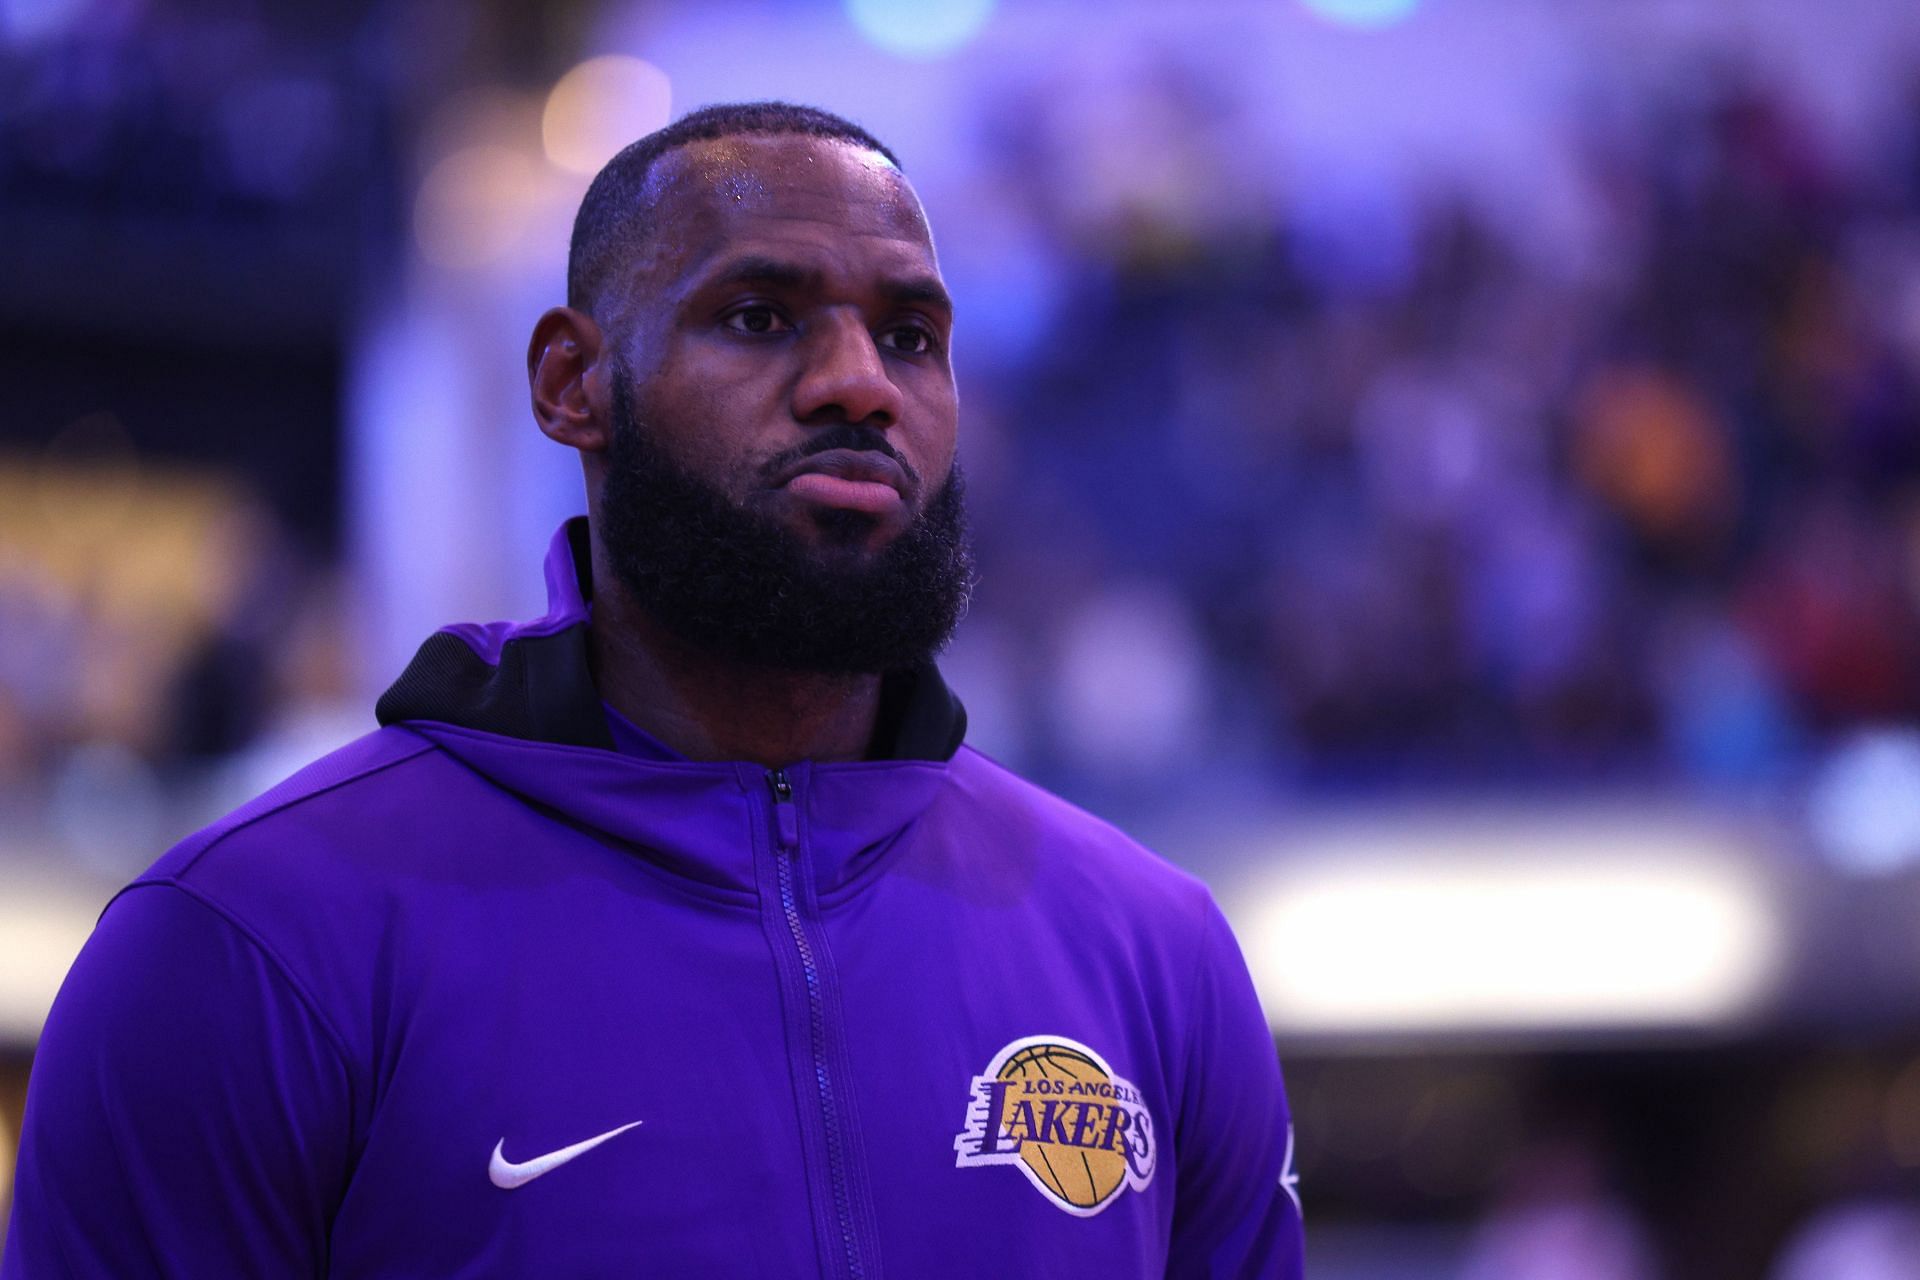 LeBron James and the LA Lakers will square off against the Boston Celtics on Tuesday